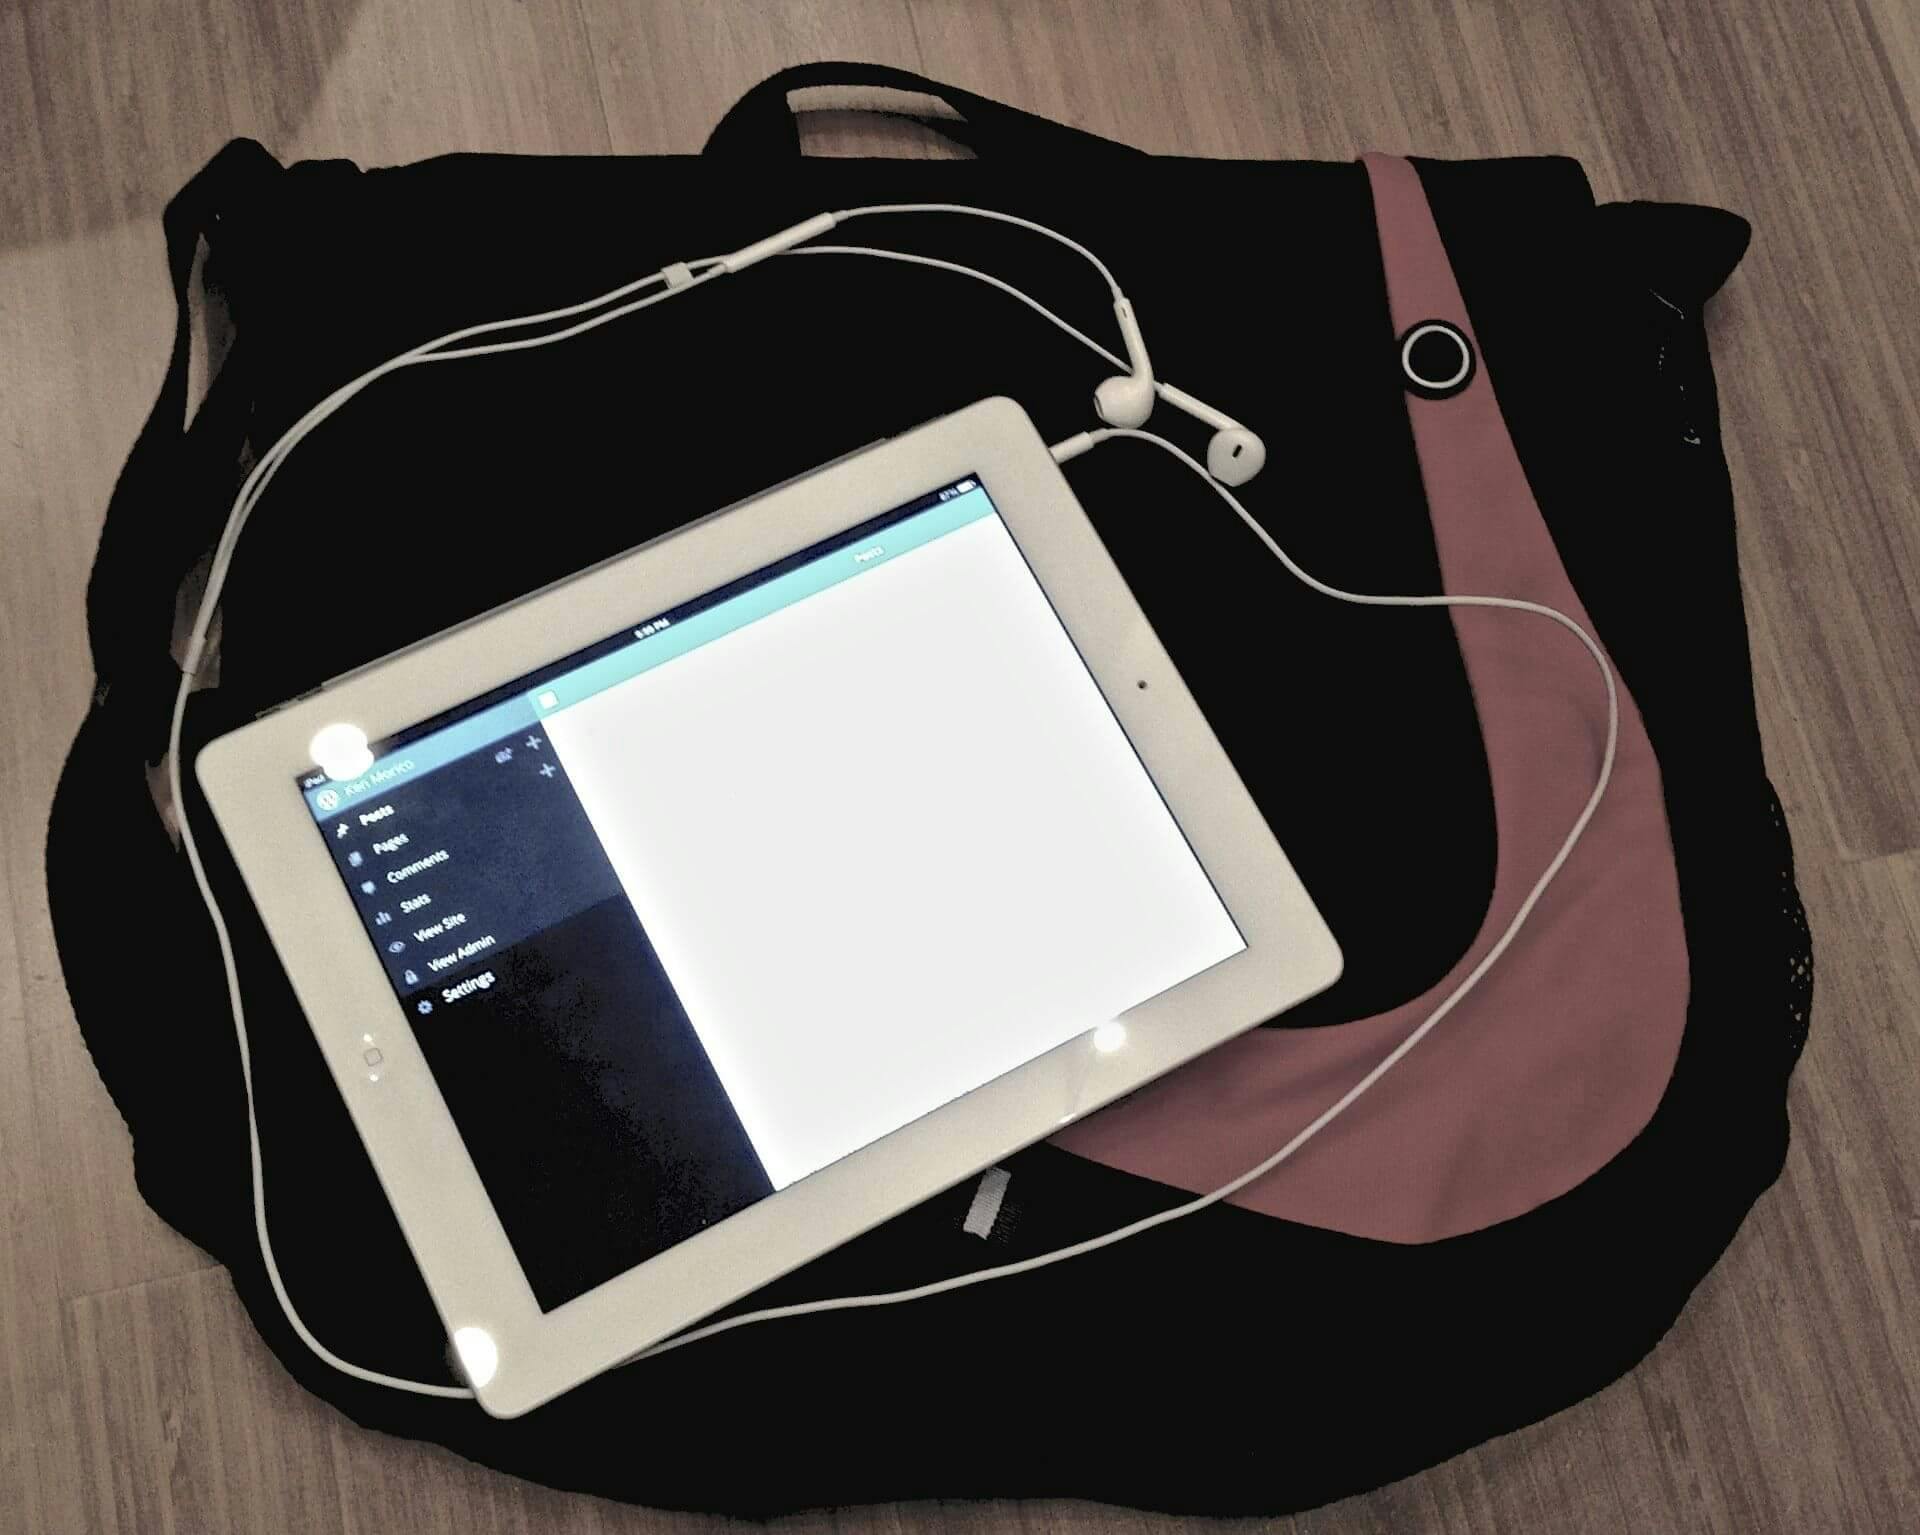 What's in my bag - iPad, Apple Earbuds, small messenger bag